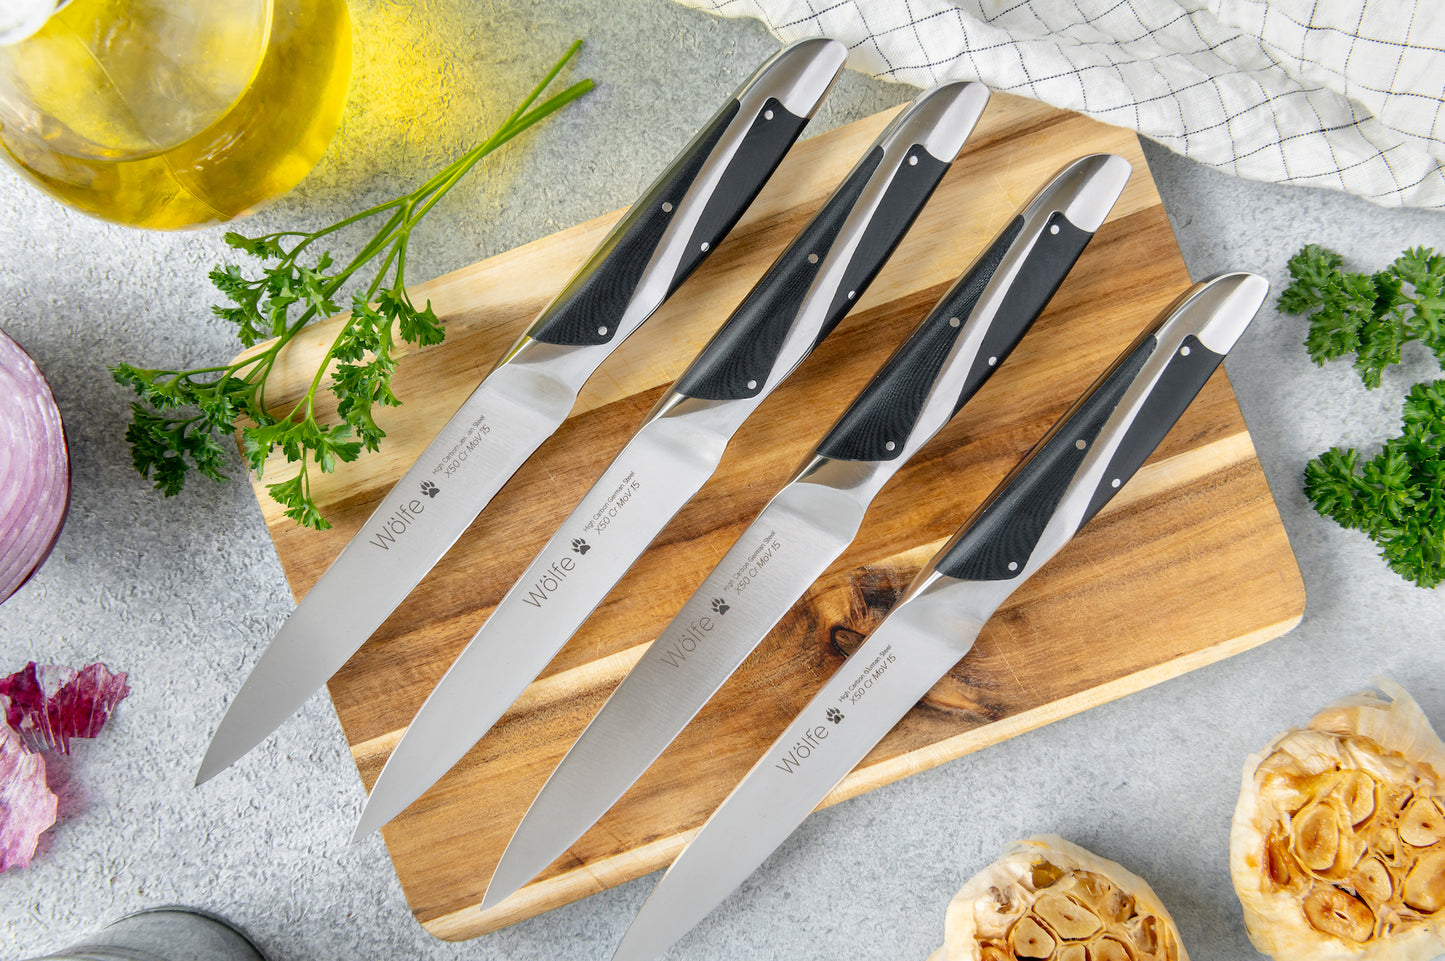 Wölfe - 14 Pc Cutlery Set with Magnetic Block